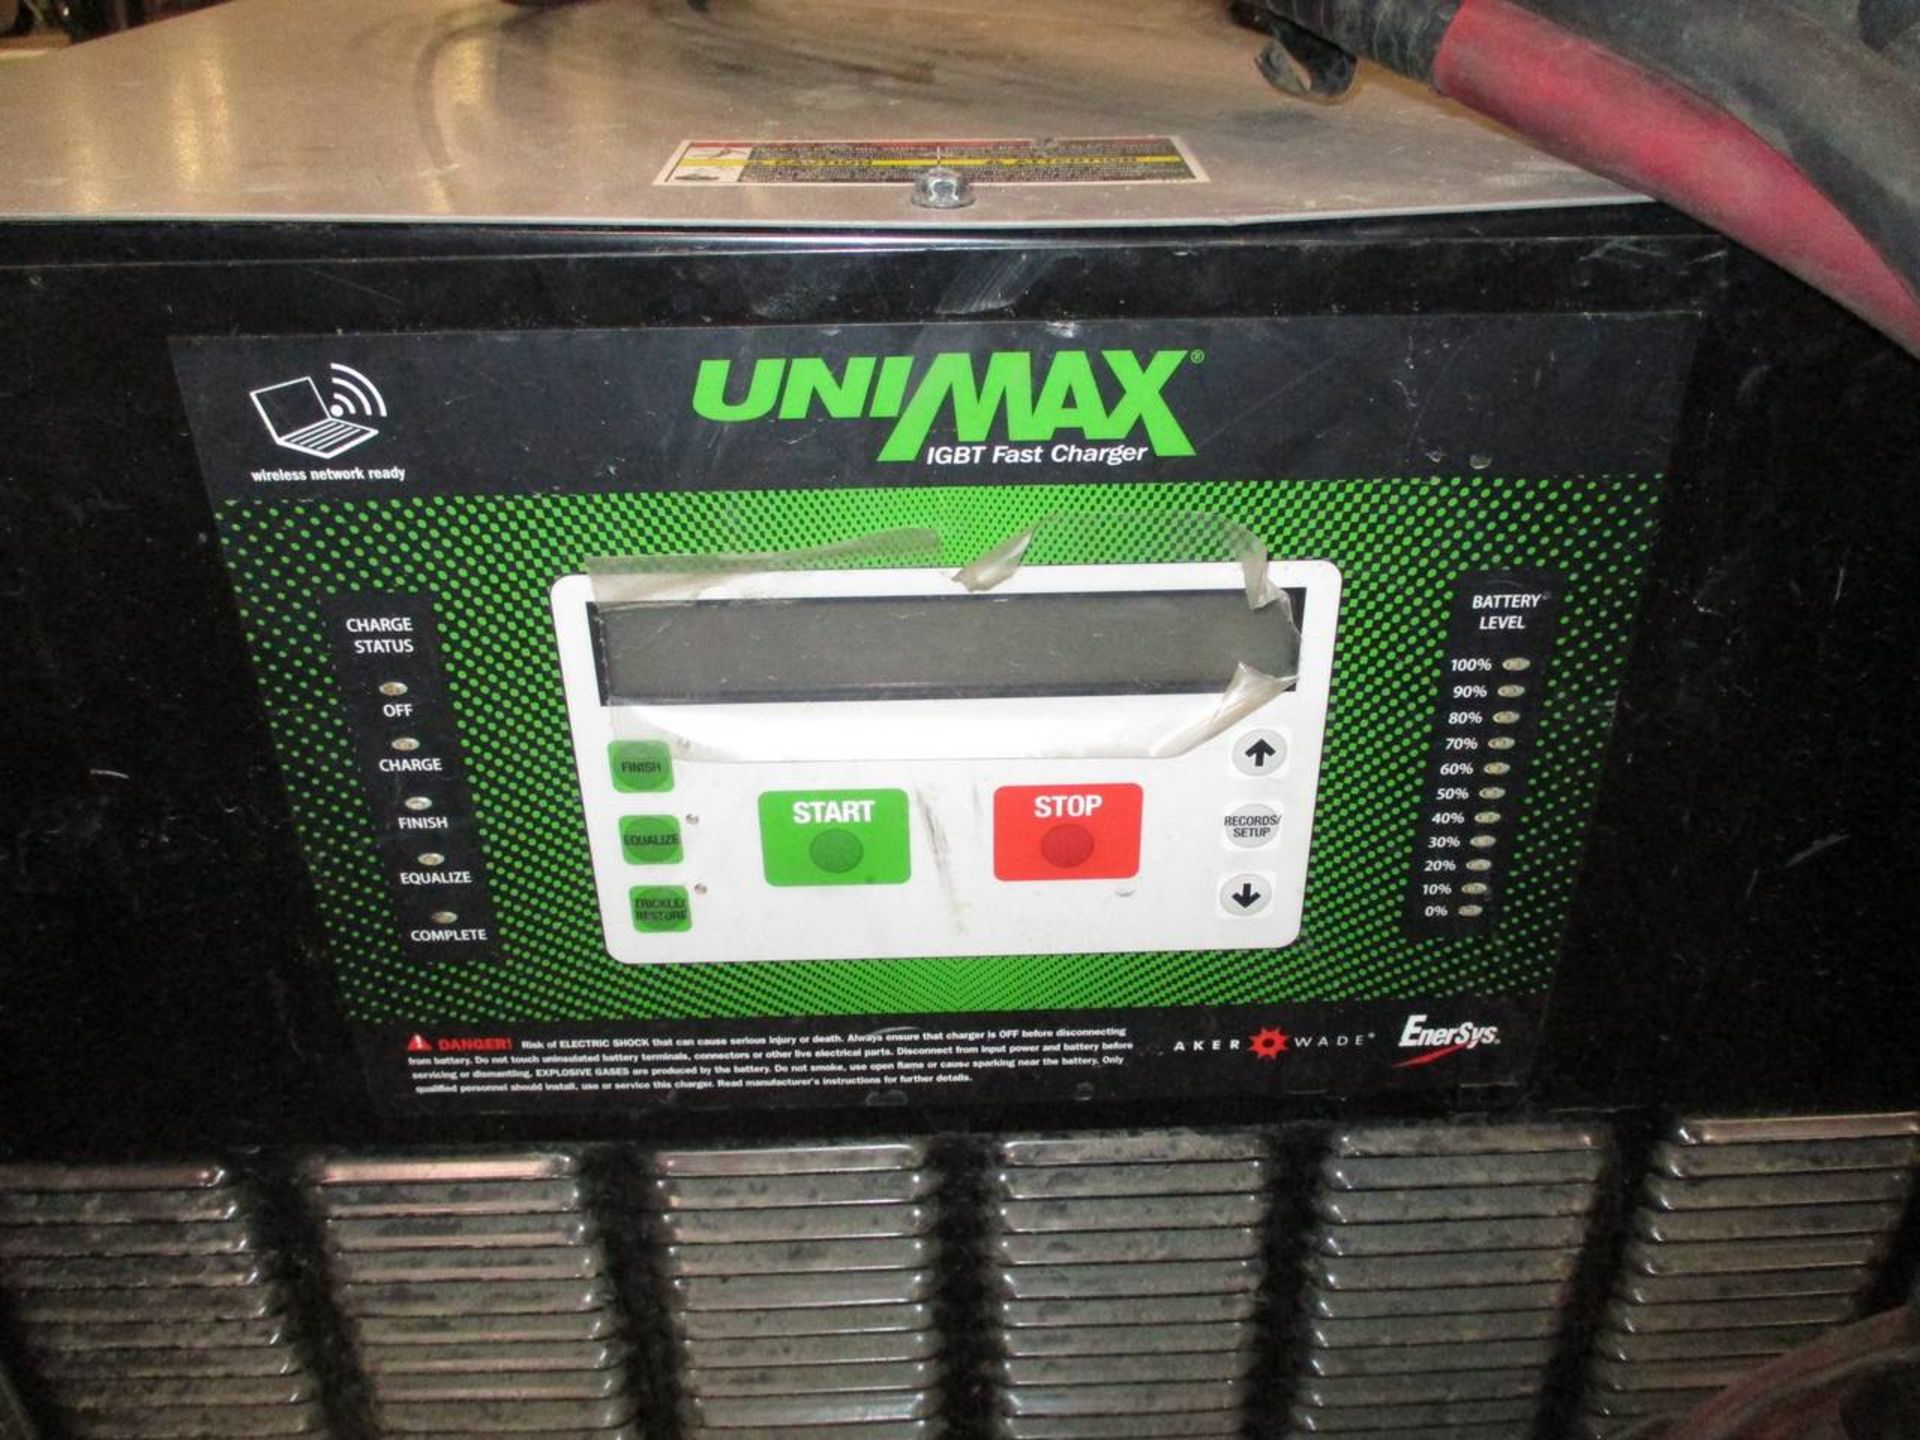 Aker Wade Unimax 30C Battery Charger - Image 6 of 6